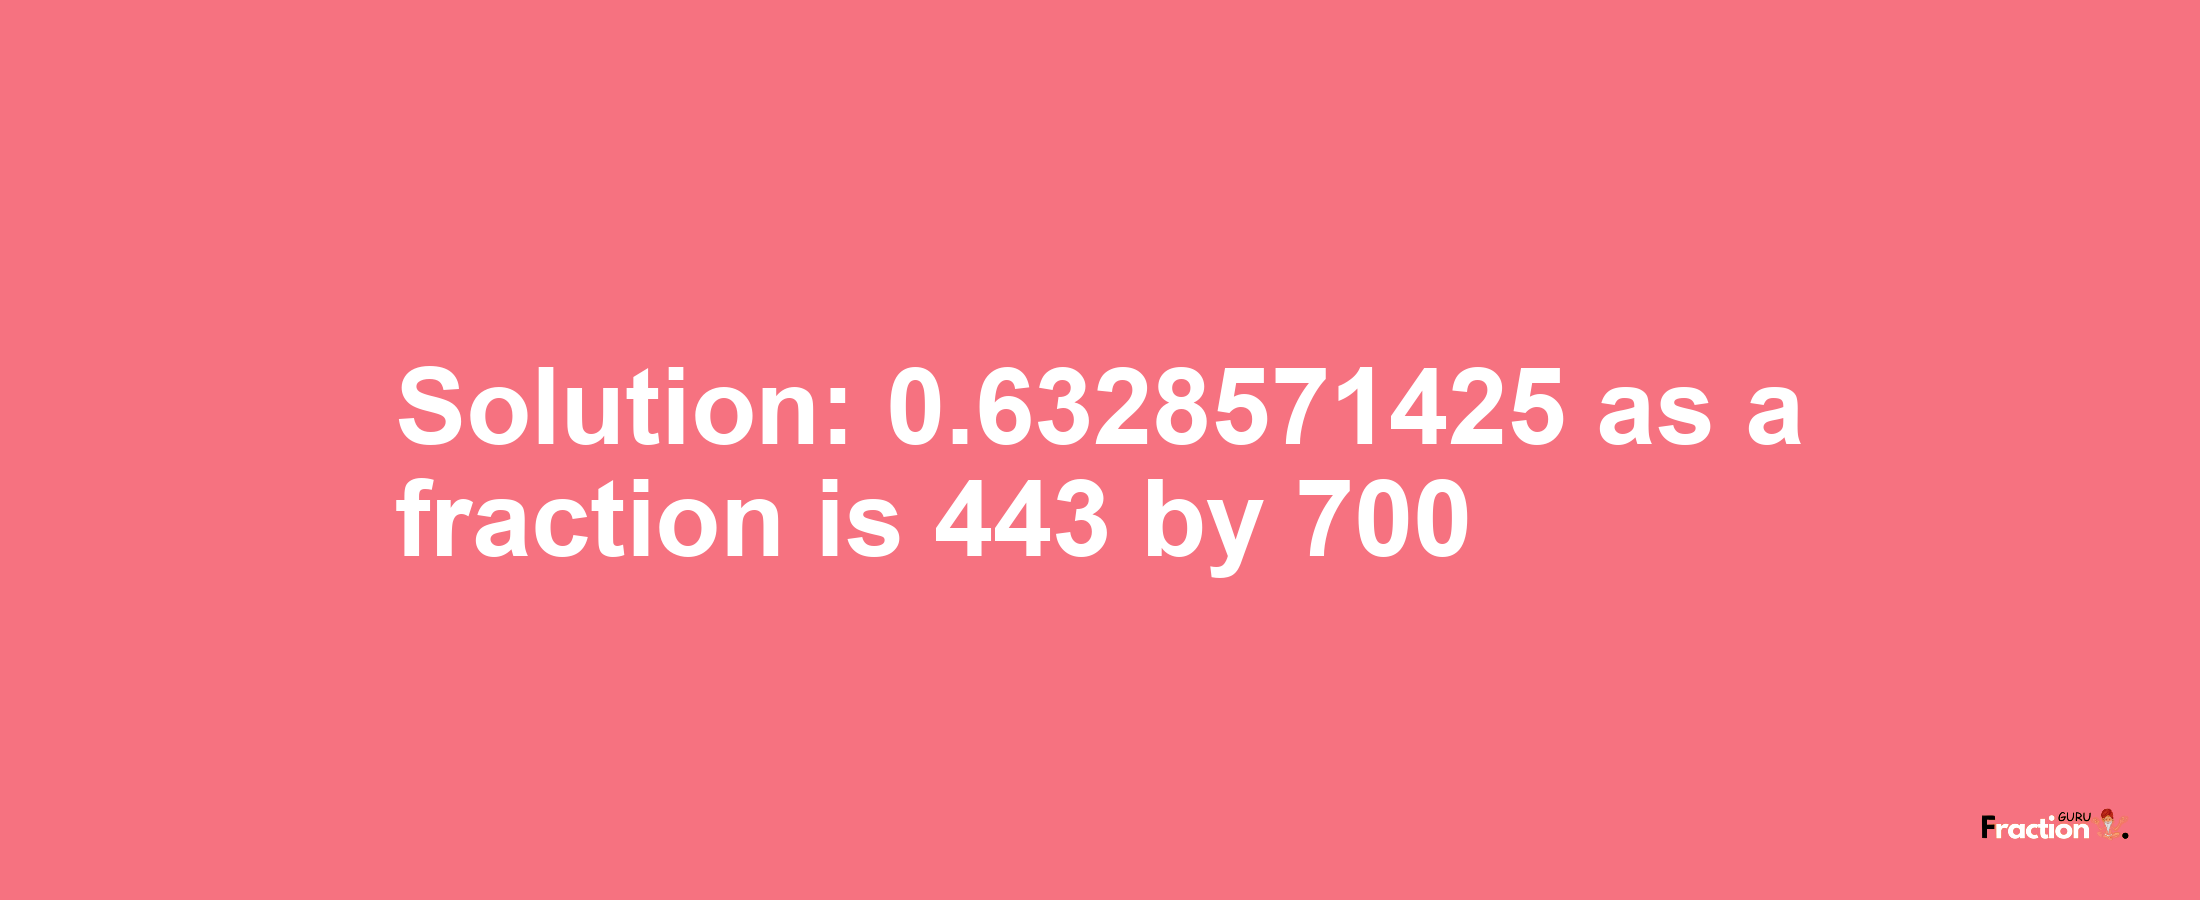 Solution:0.6328571425 as a fraction is 443/700